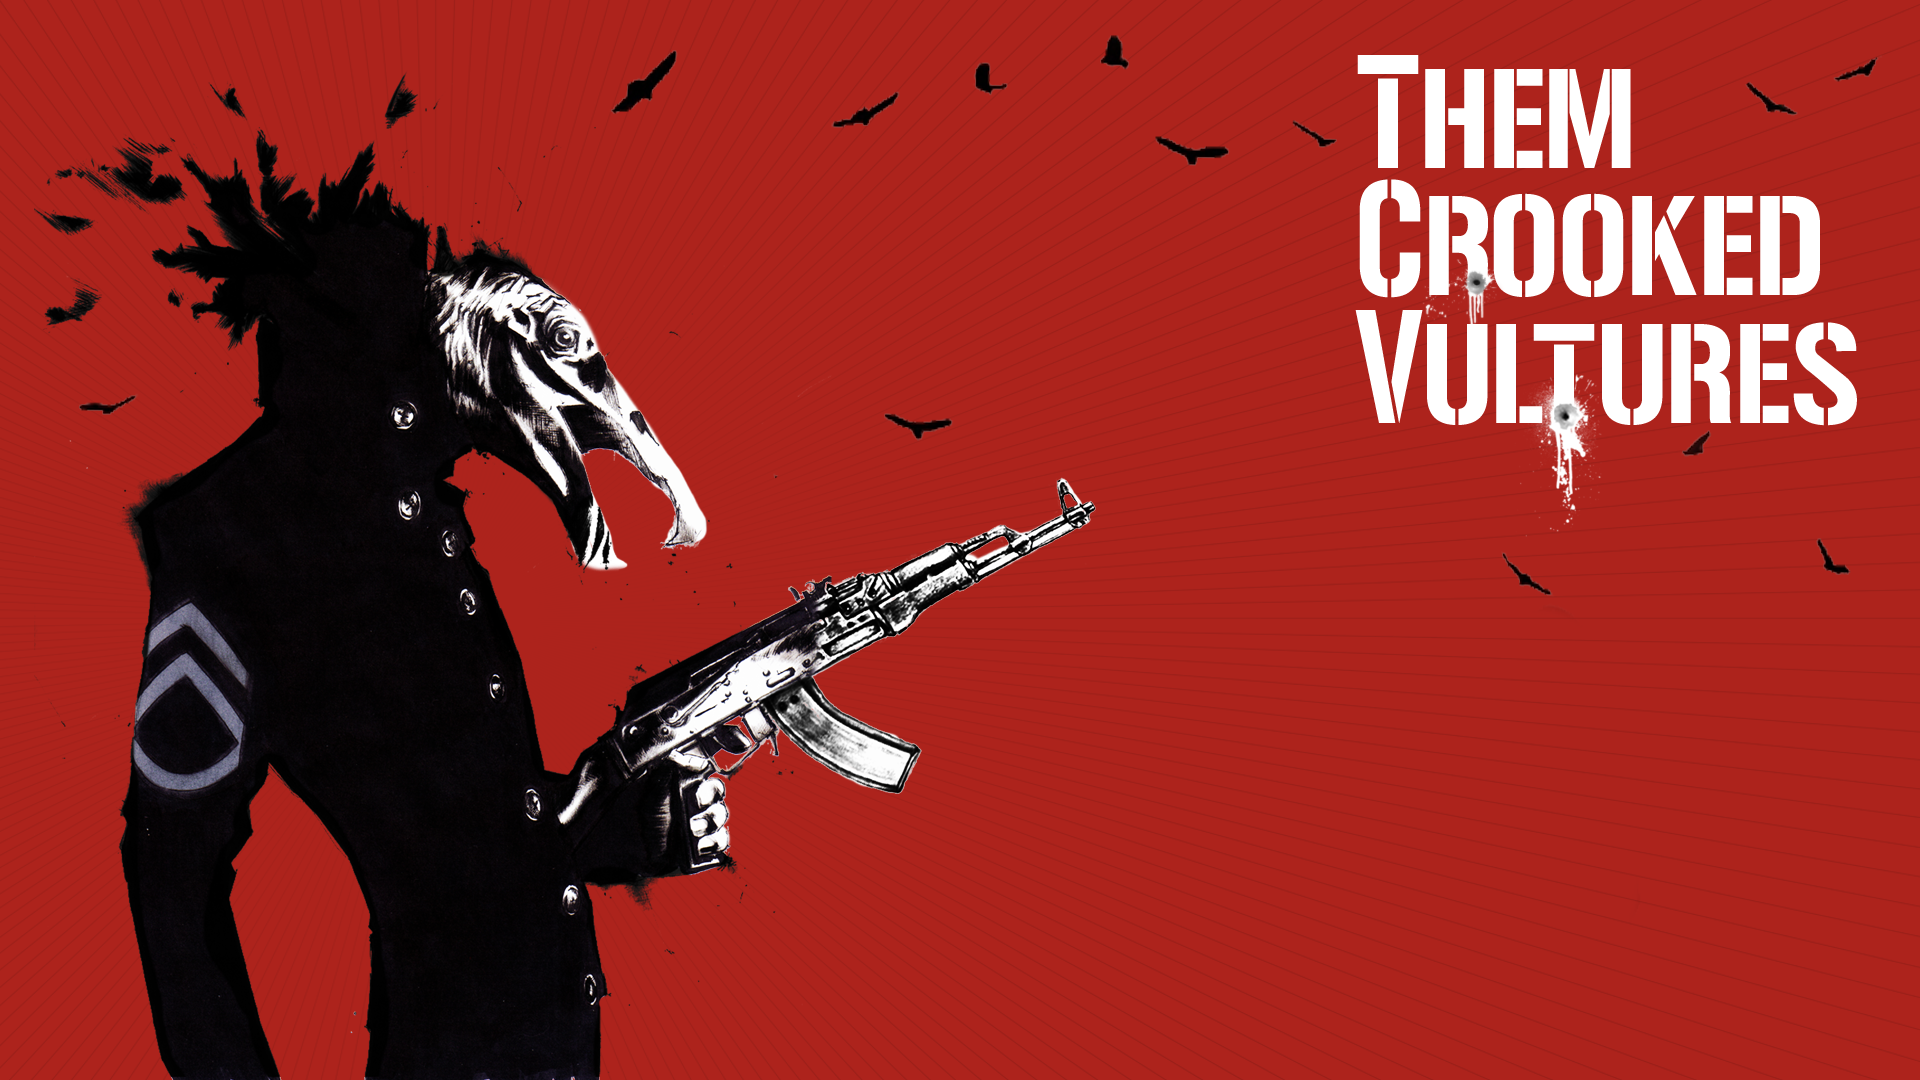 Them Crooked Vultures HD Wallpaper Background Image